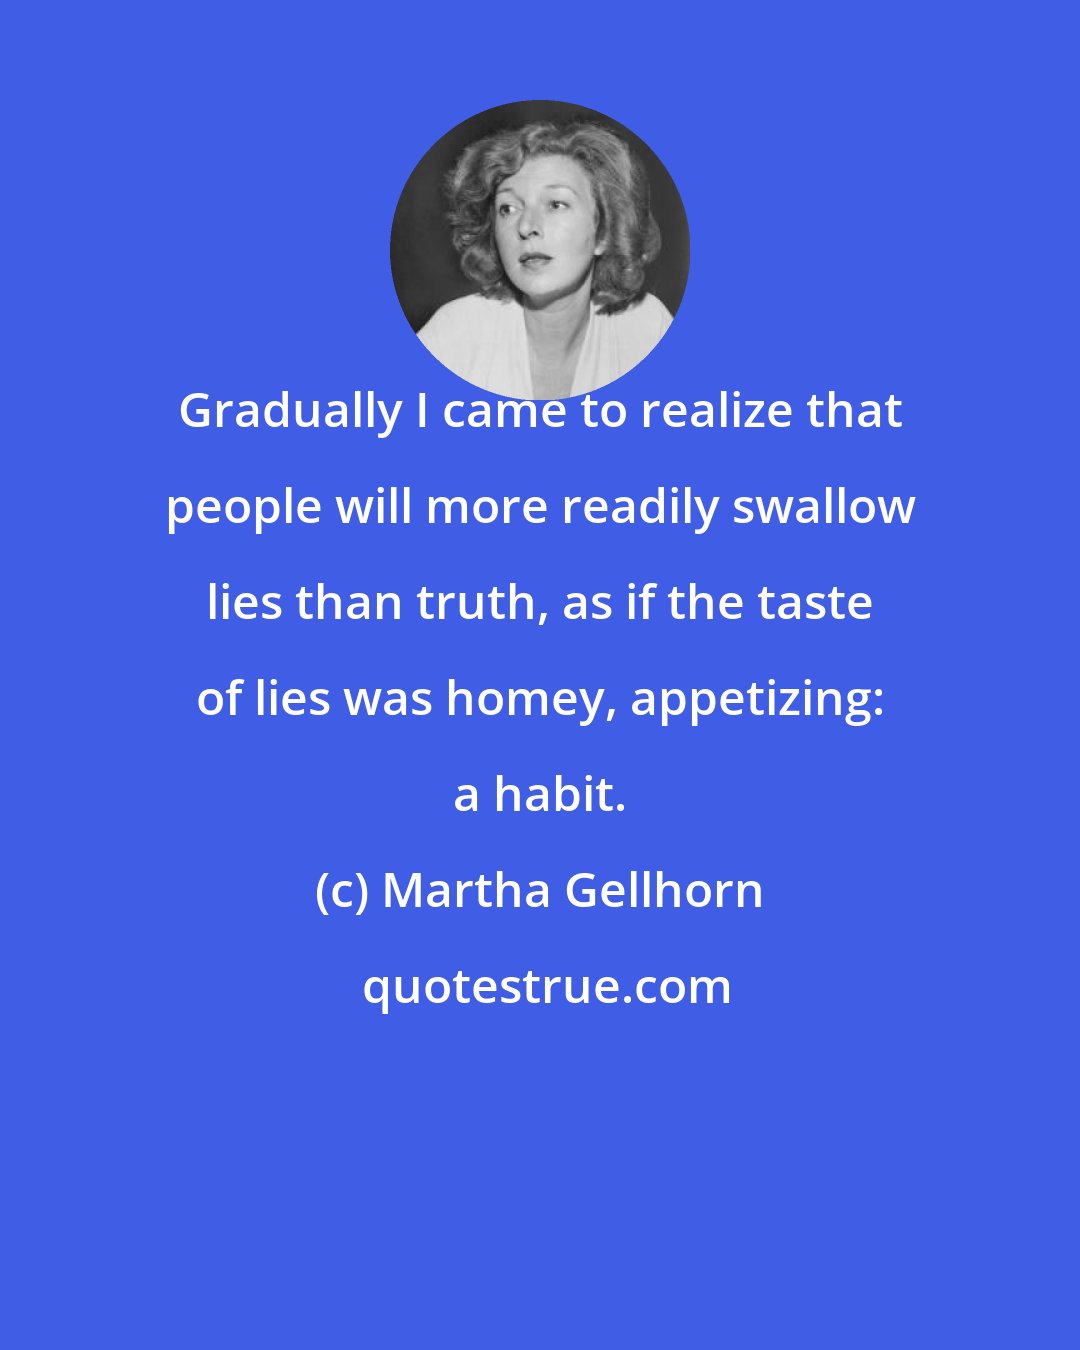 Martha Gellhorn: Gradually I came to realize that people will more readily swallow lies than truth, as if the taste of lies was homey, appetizing: a habit.